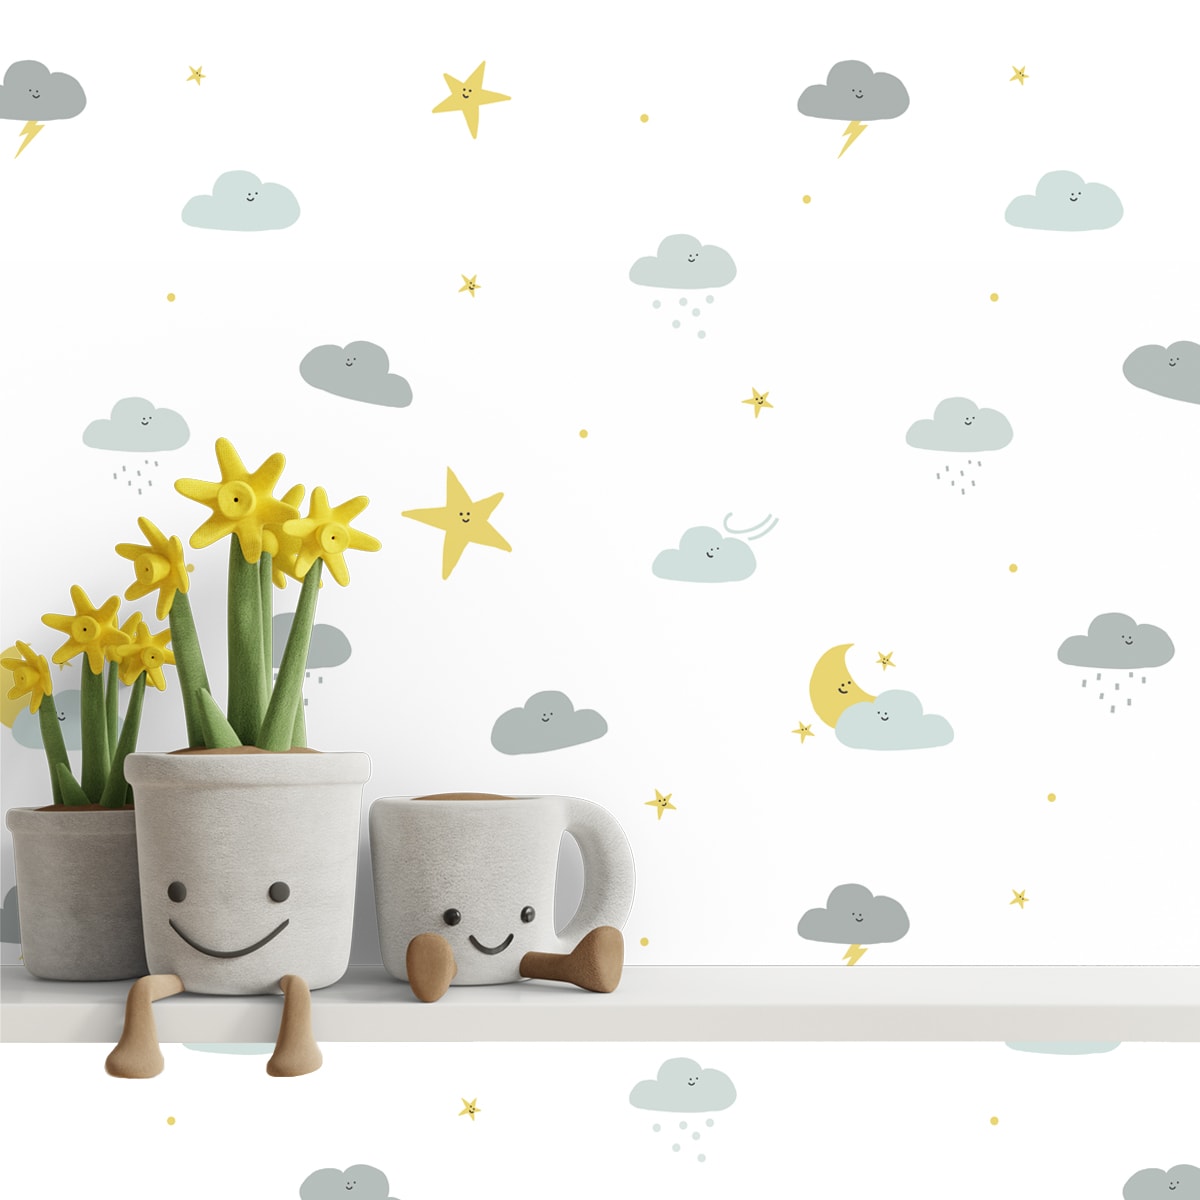 Moon & Clouds Design for Kids Room Nursery Wallpaper, Customized